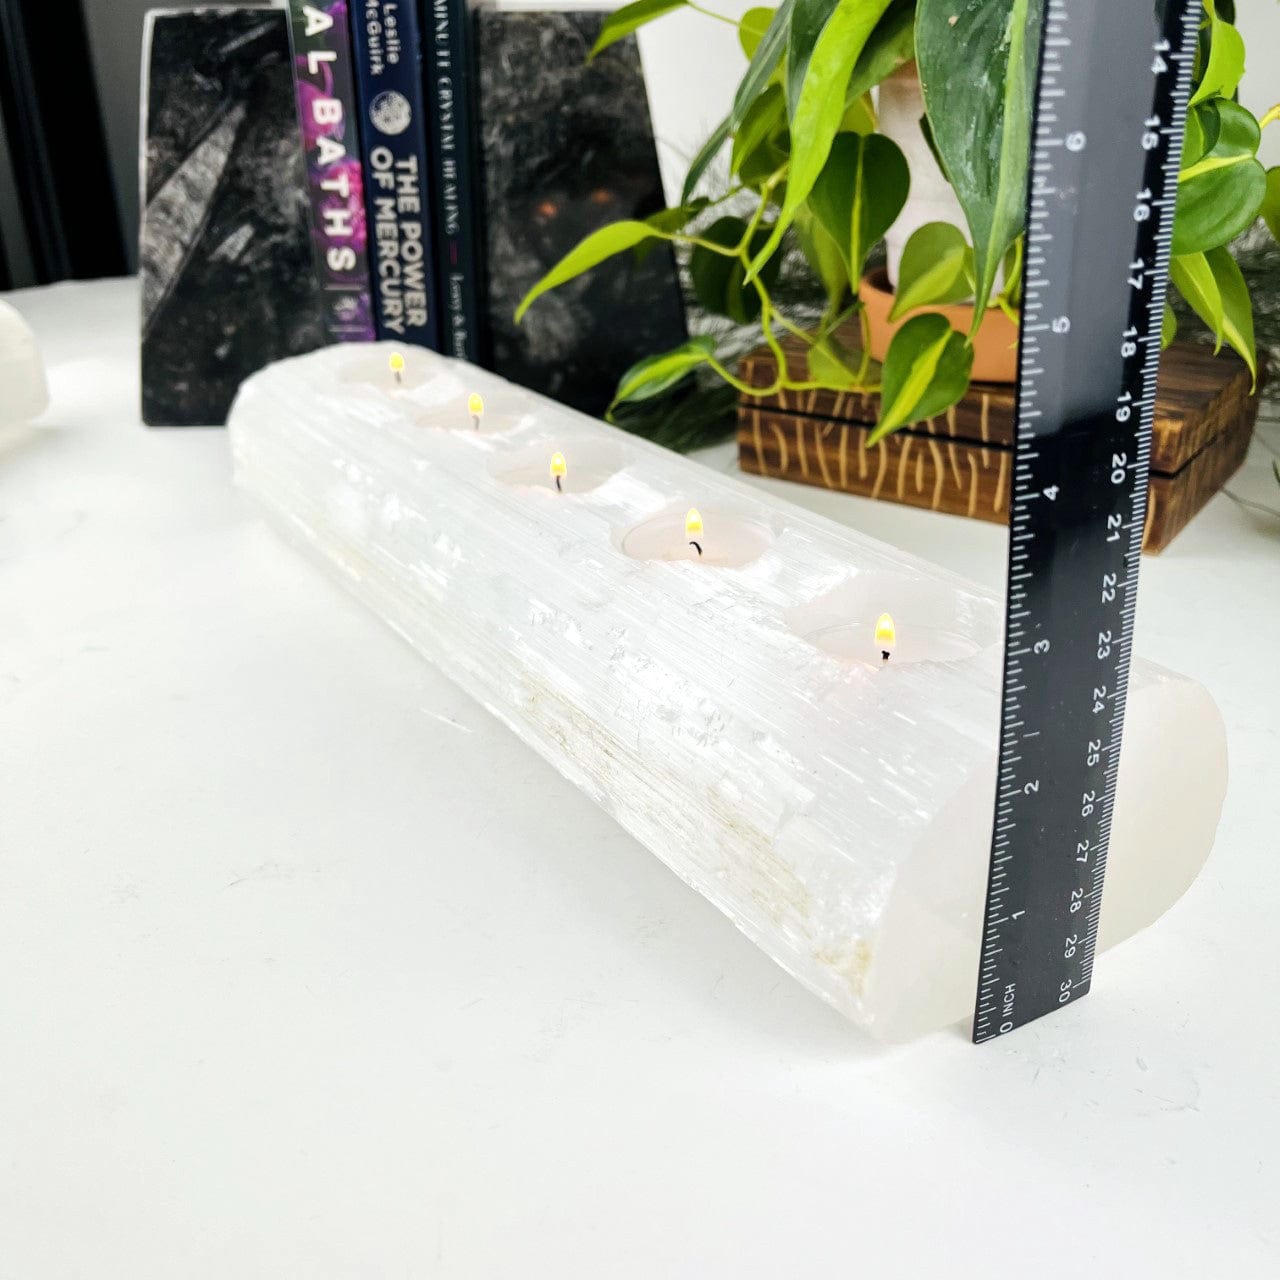 Selenite Candle Holder XL Size with 5 Holes for Votives Lit with a ruler showing how tall